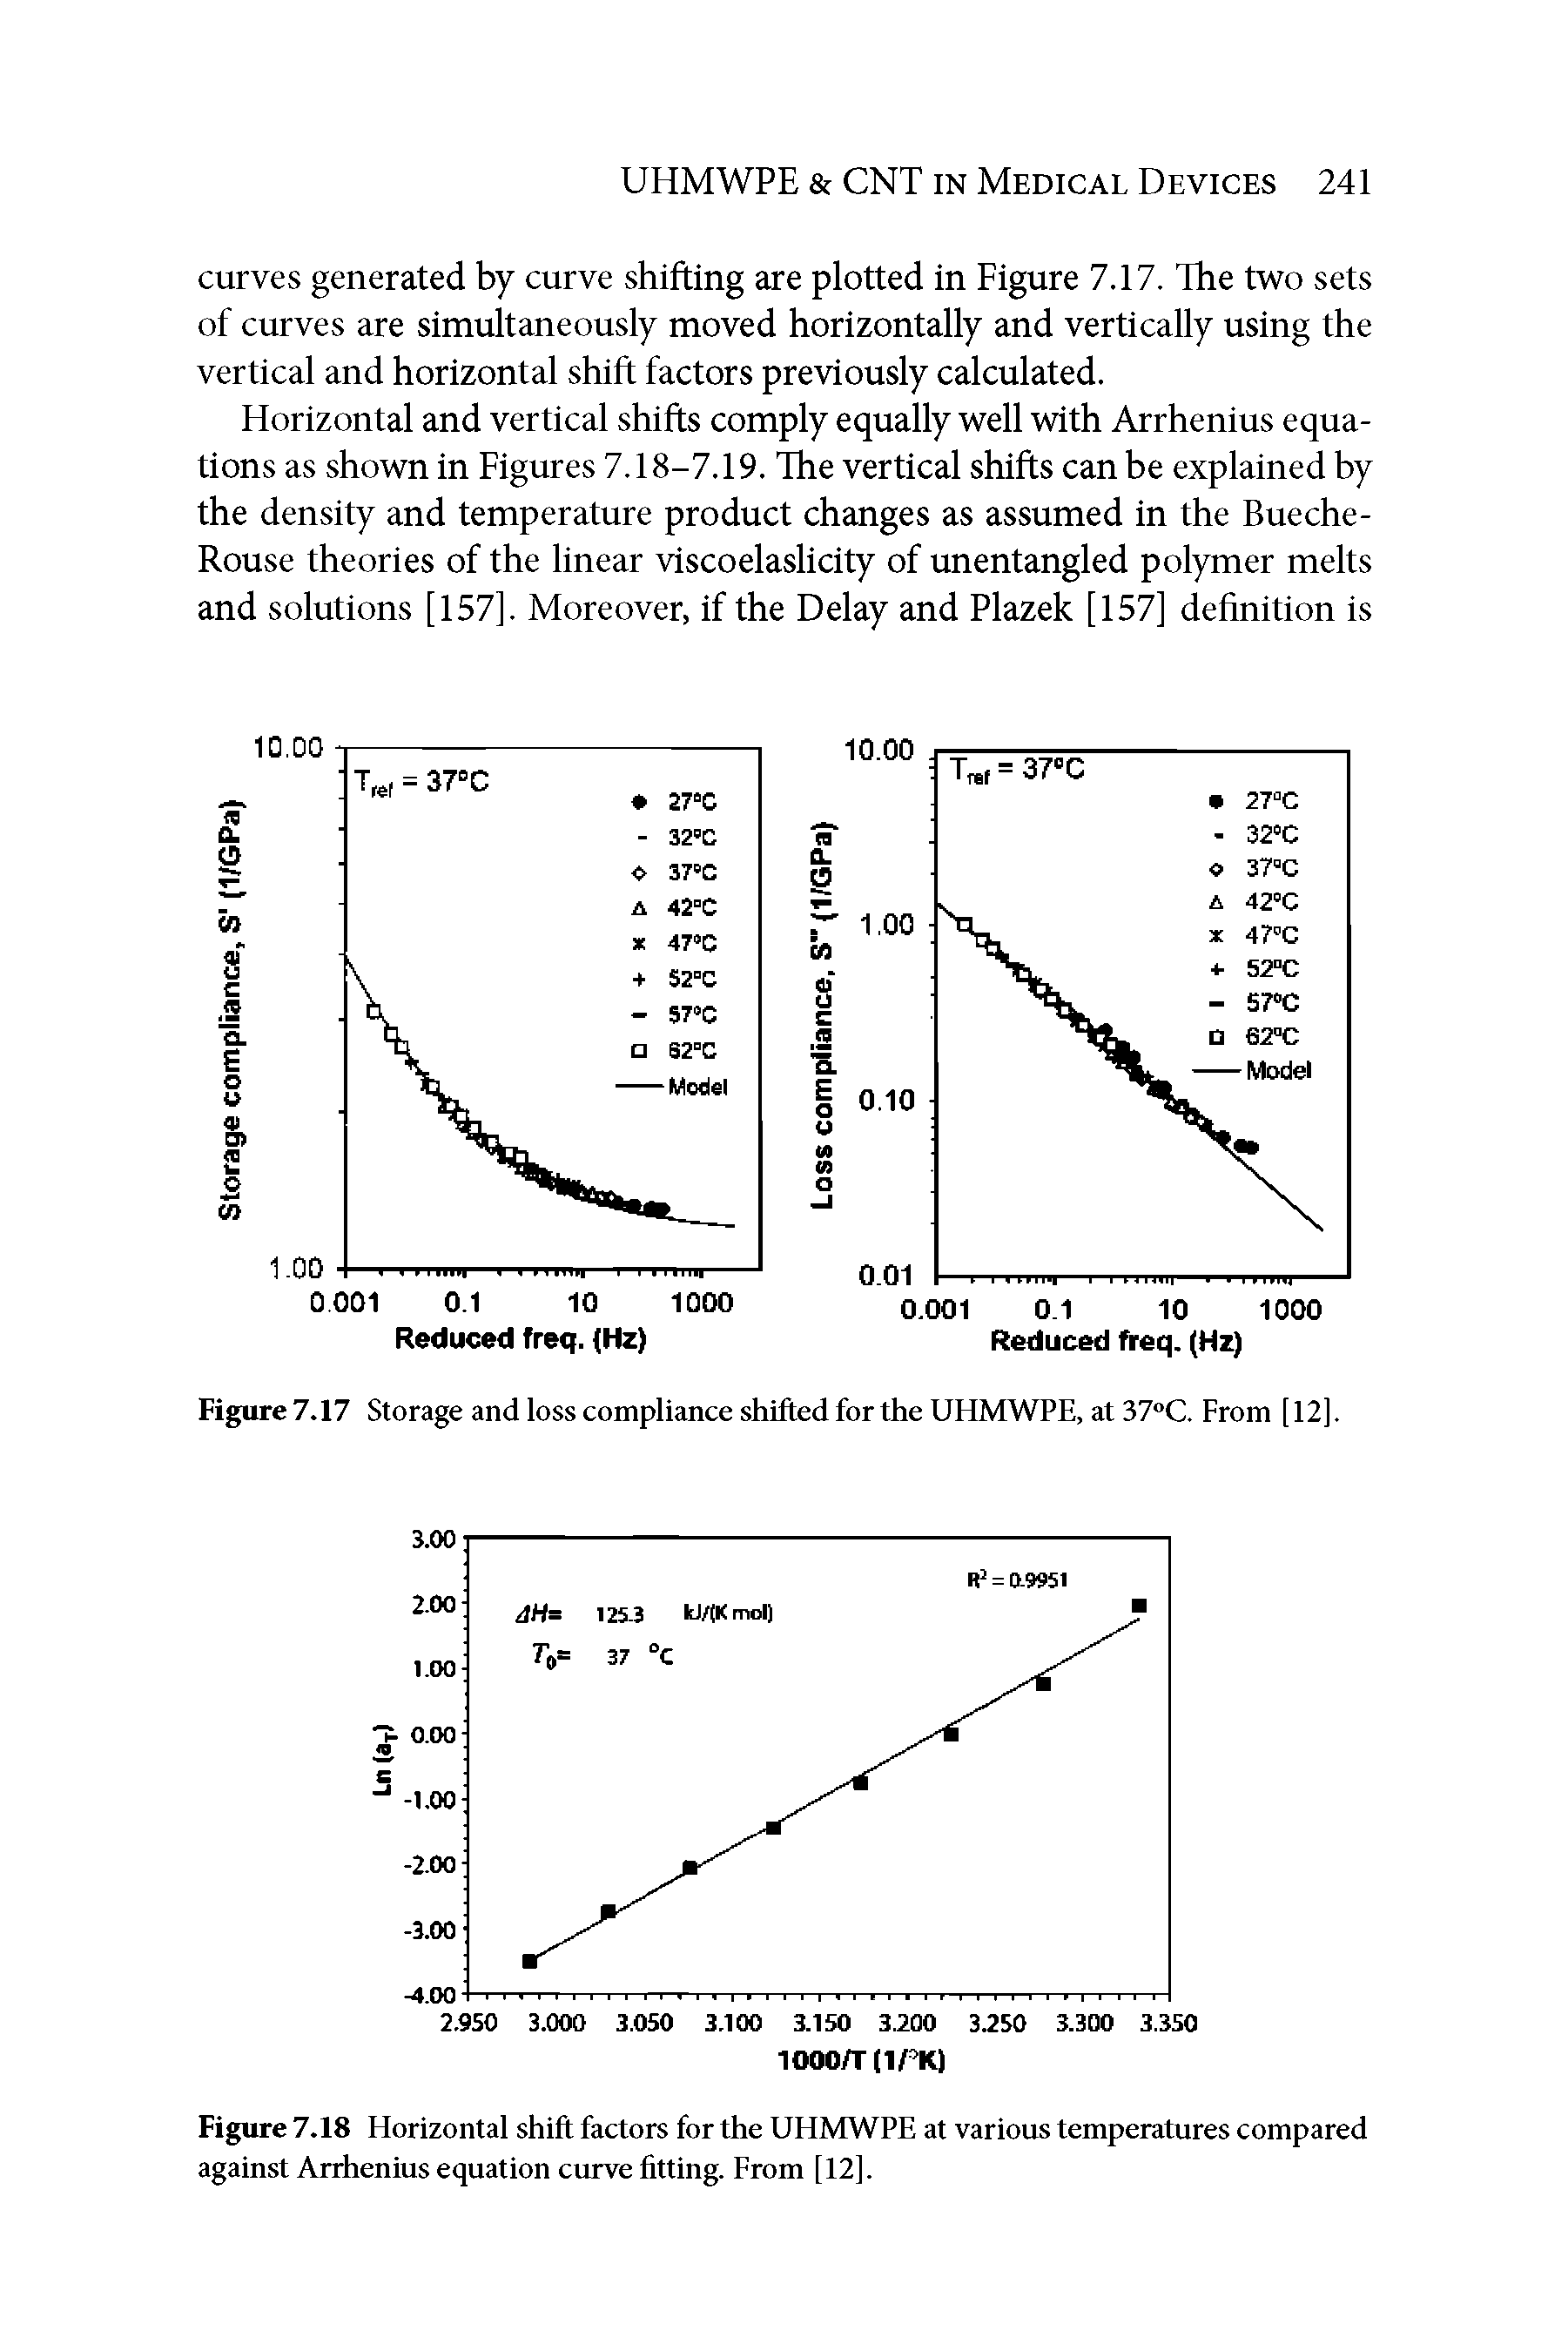 Figure 7.18 Horizontal shift factors for the UHIVIWPE at various temperatures compared against Arrhenius equation curve fitting. From [12].